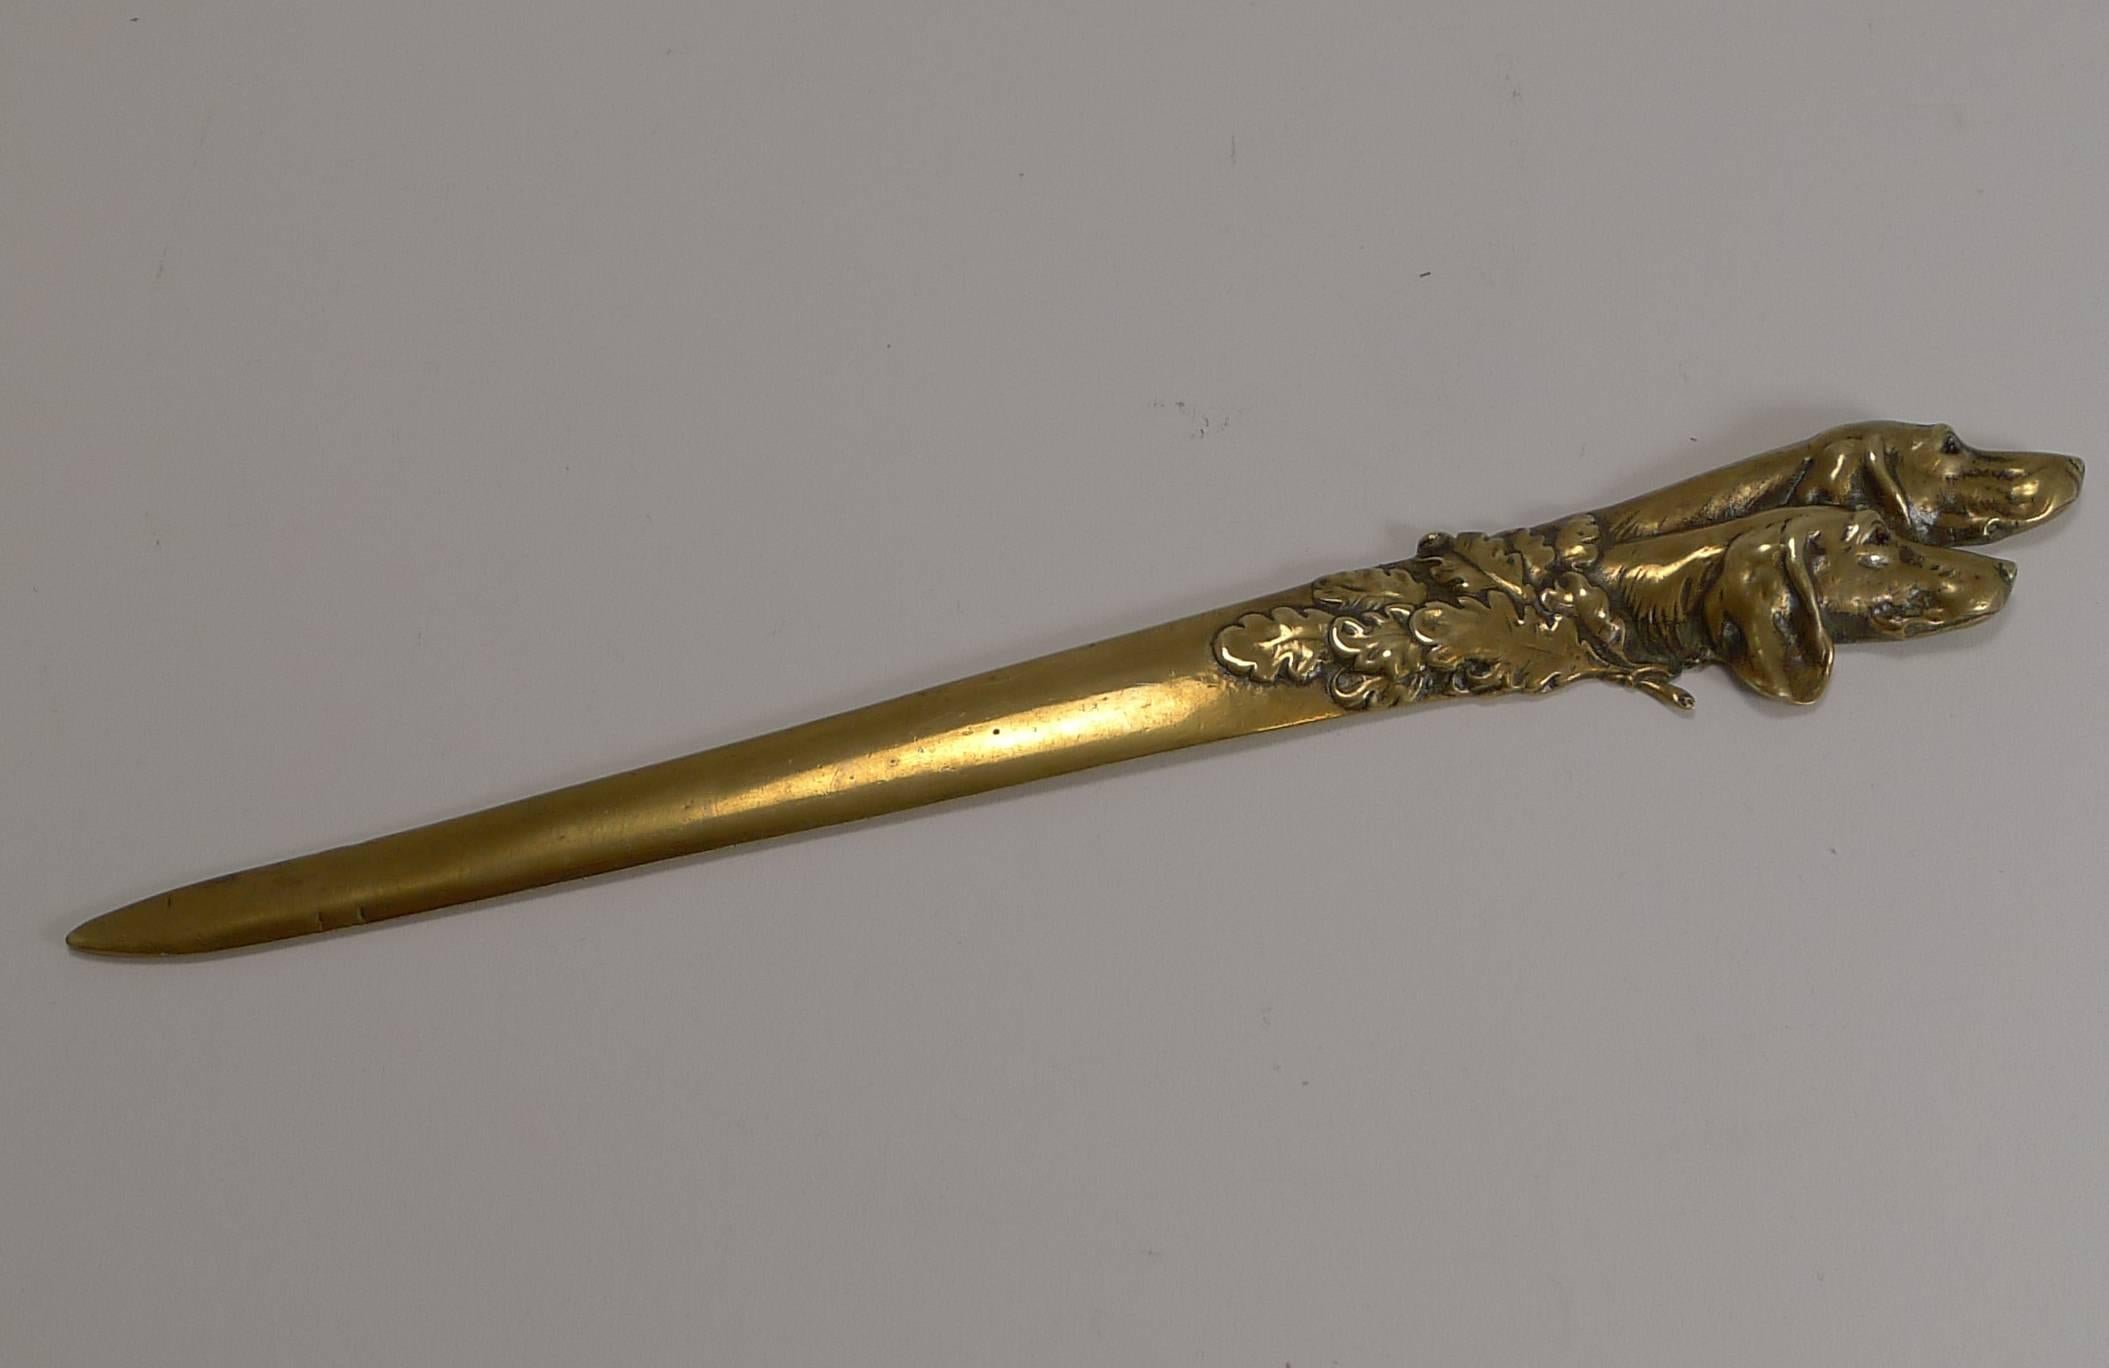 Brass Antique English Novelty Letter Opener, Dogs with Glass Eyes